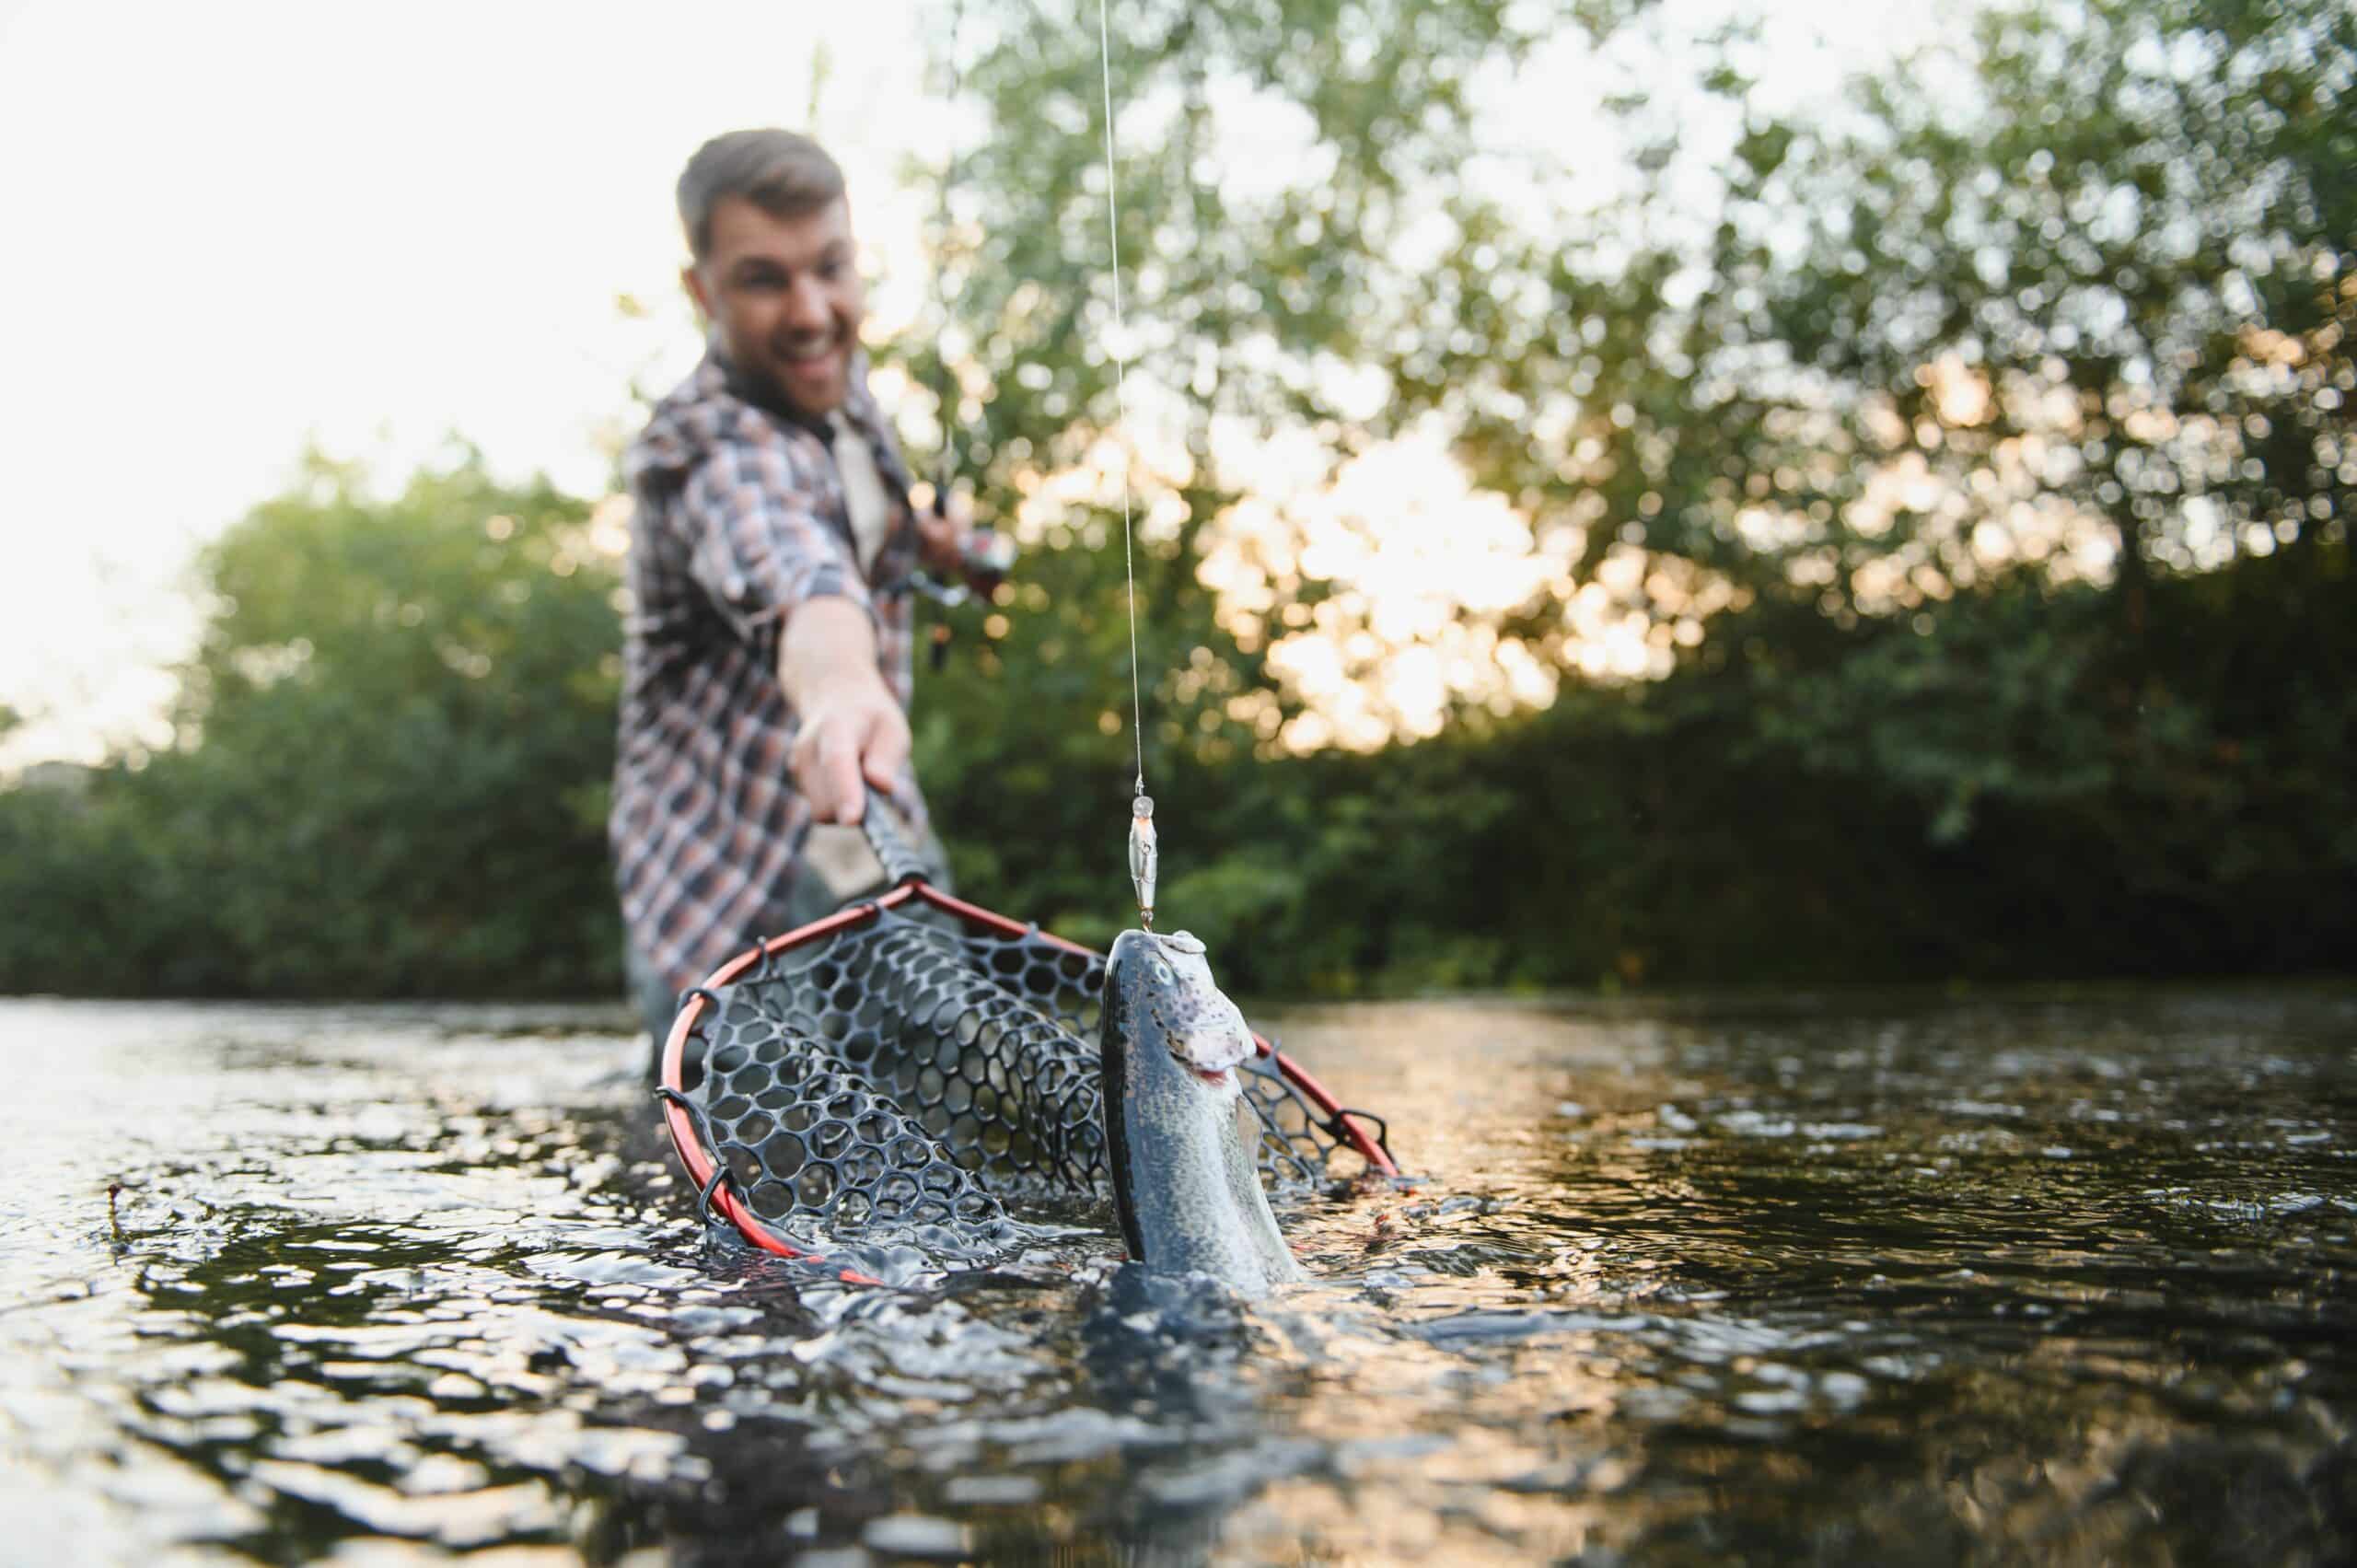 fanatic4fishing.com : Does catch and release hurt fish?